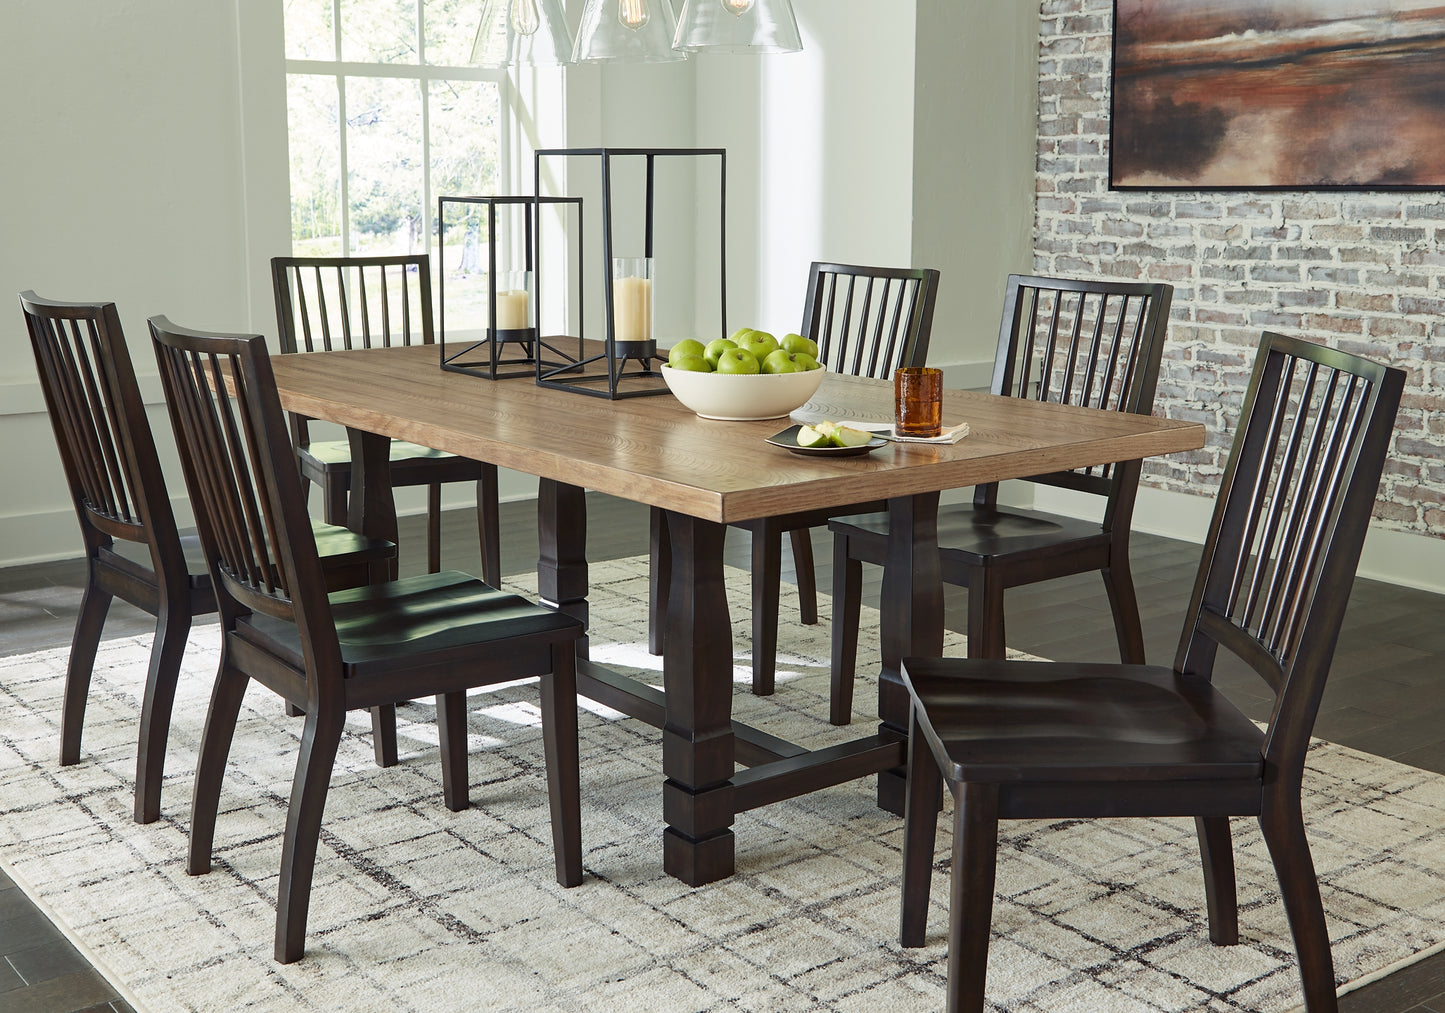 Charterton Dining Table and 6 Chairs